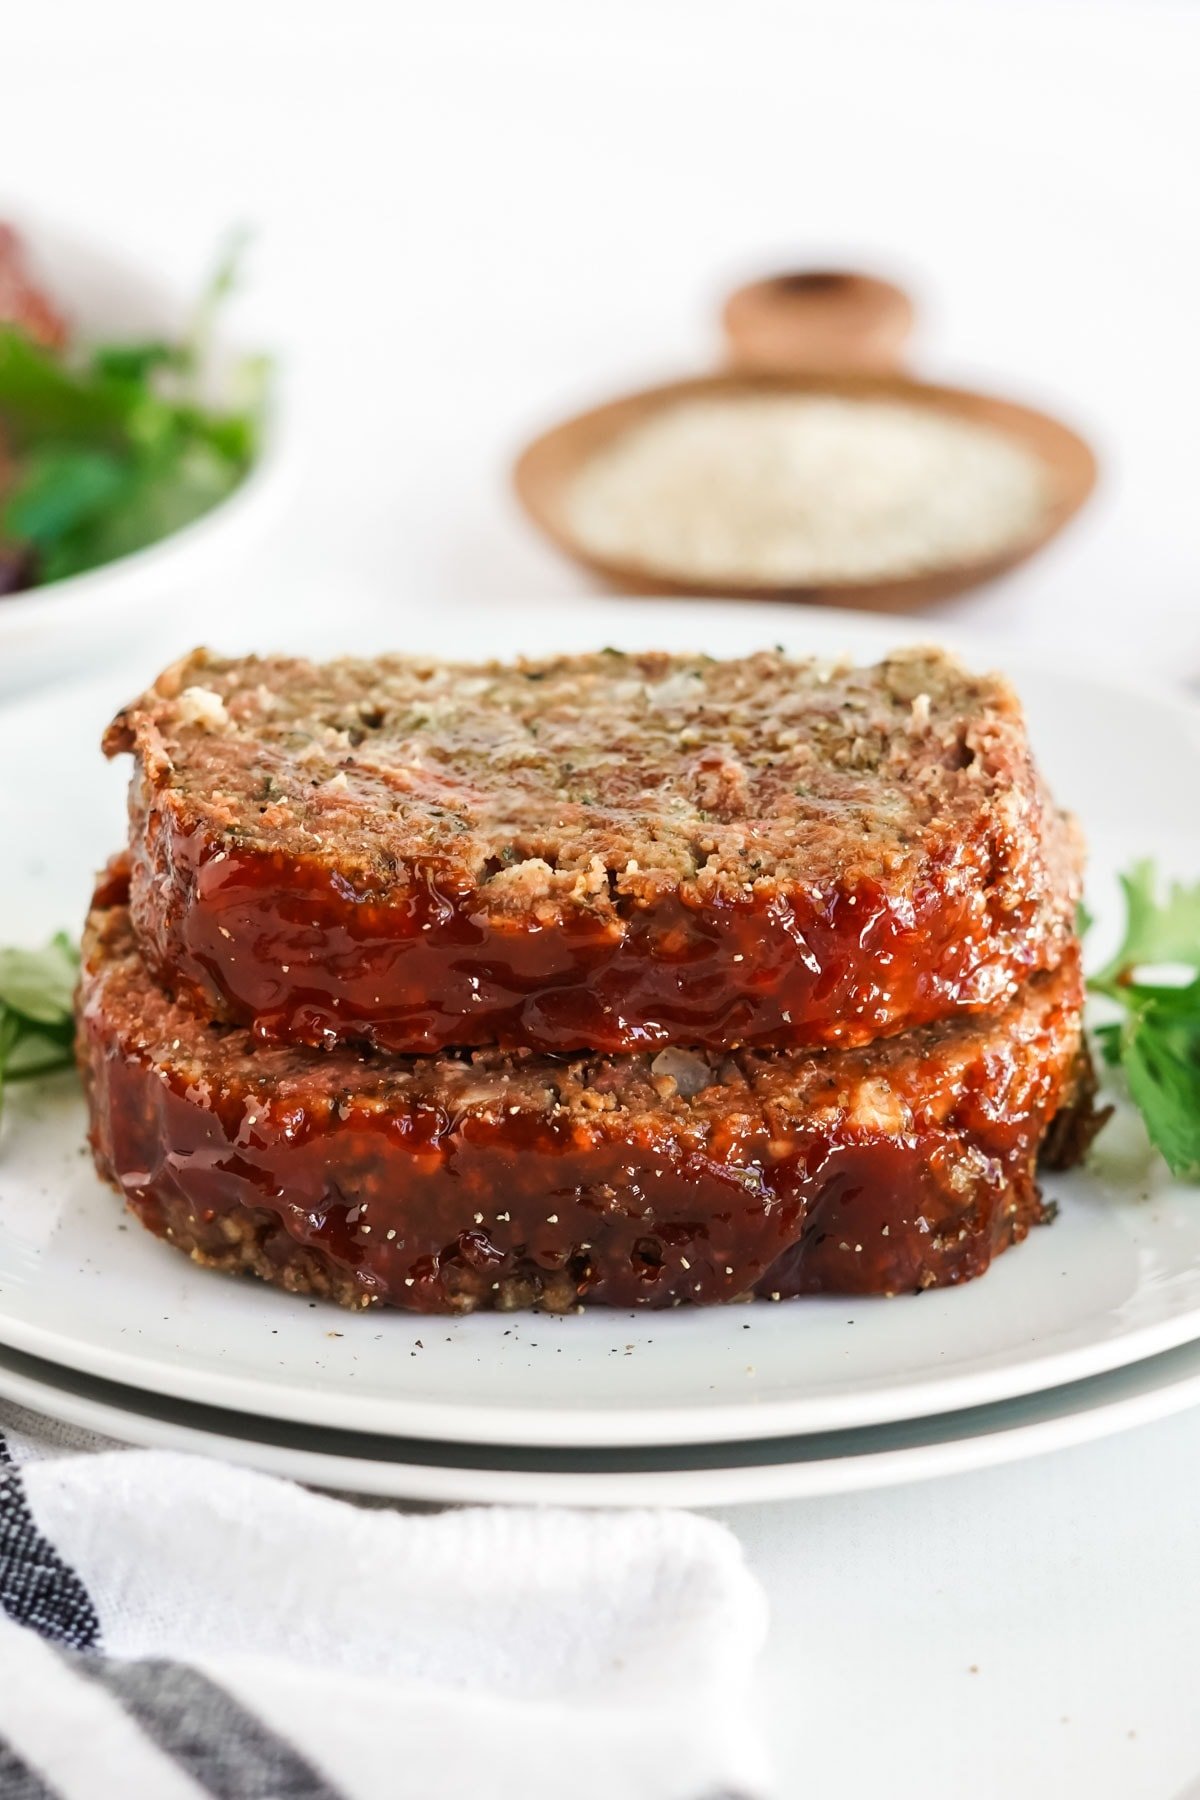 slices of meatloaf on a plate